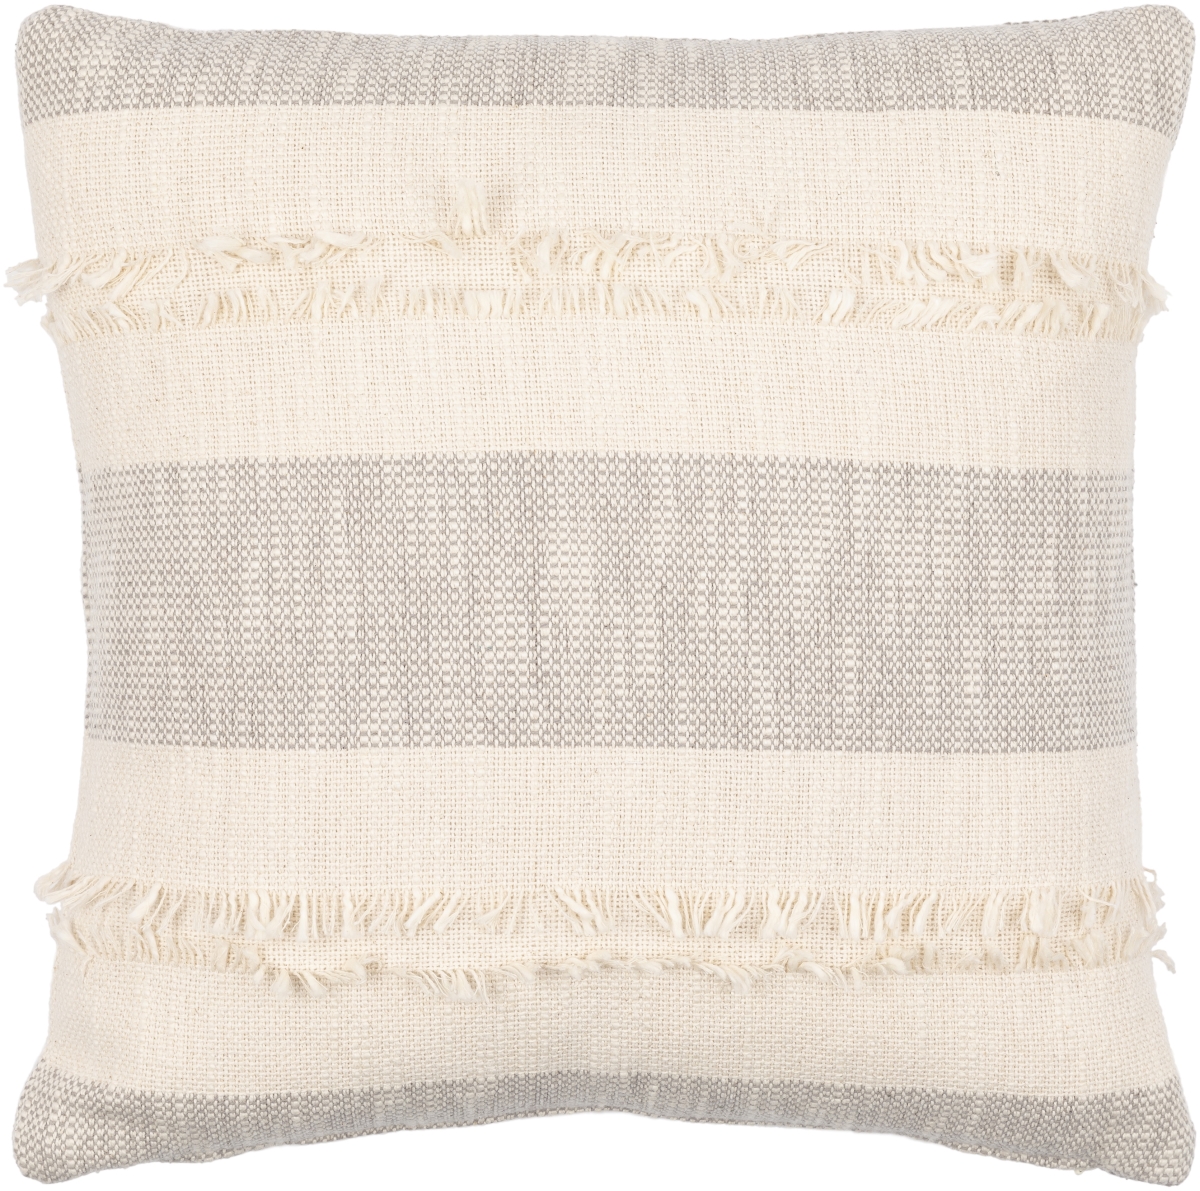 Picture of Livabliss KIF002-2222 22 x 22 in. Kiefer Pillow Cover - Multi Color